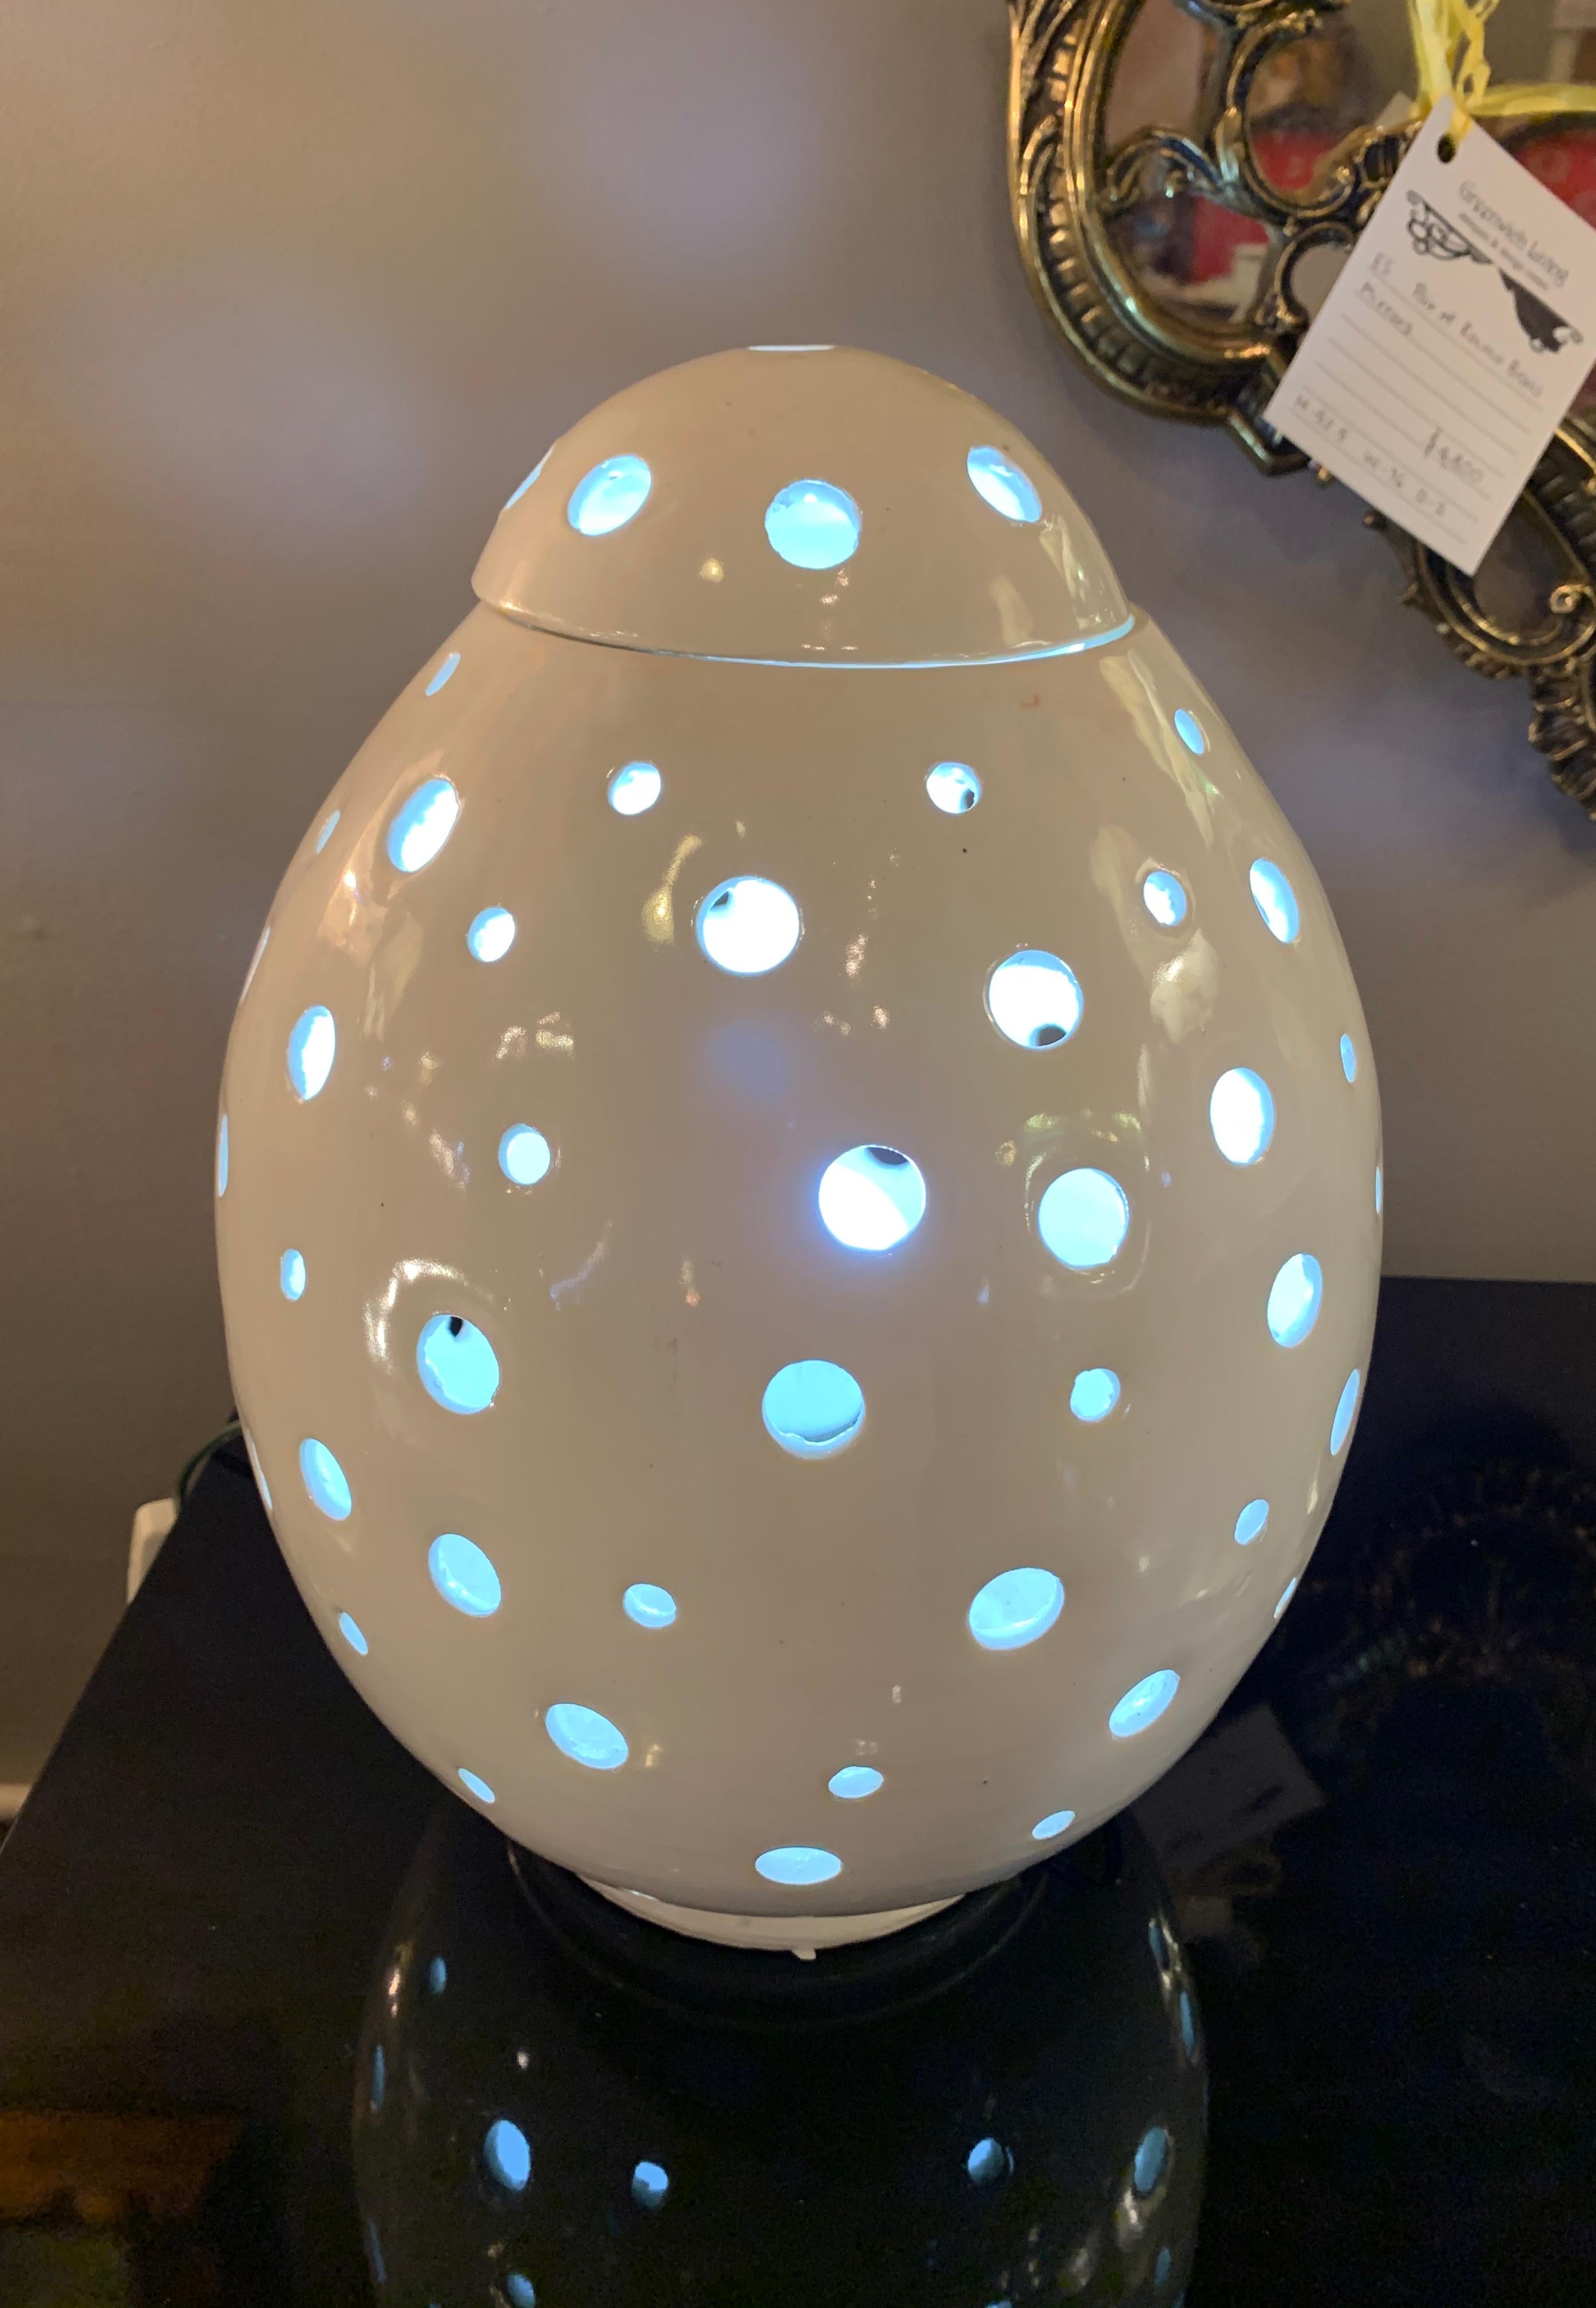 White modern egg form table lamp
Our chic and modern table lamp is a marvel of design and ceramic craftsmanship. 100% Handmade, the egg shape is a fusion of modern with traditional themes and creates a wonderfully diffuse light. 

Color: White